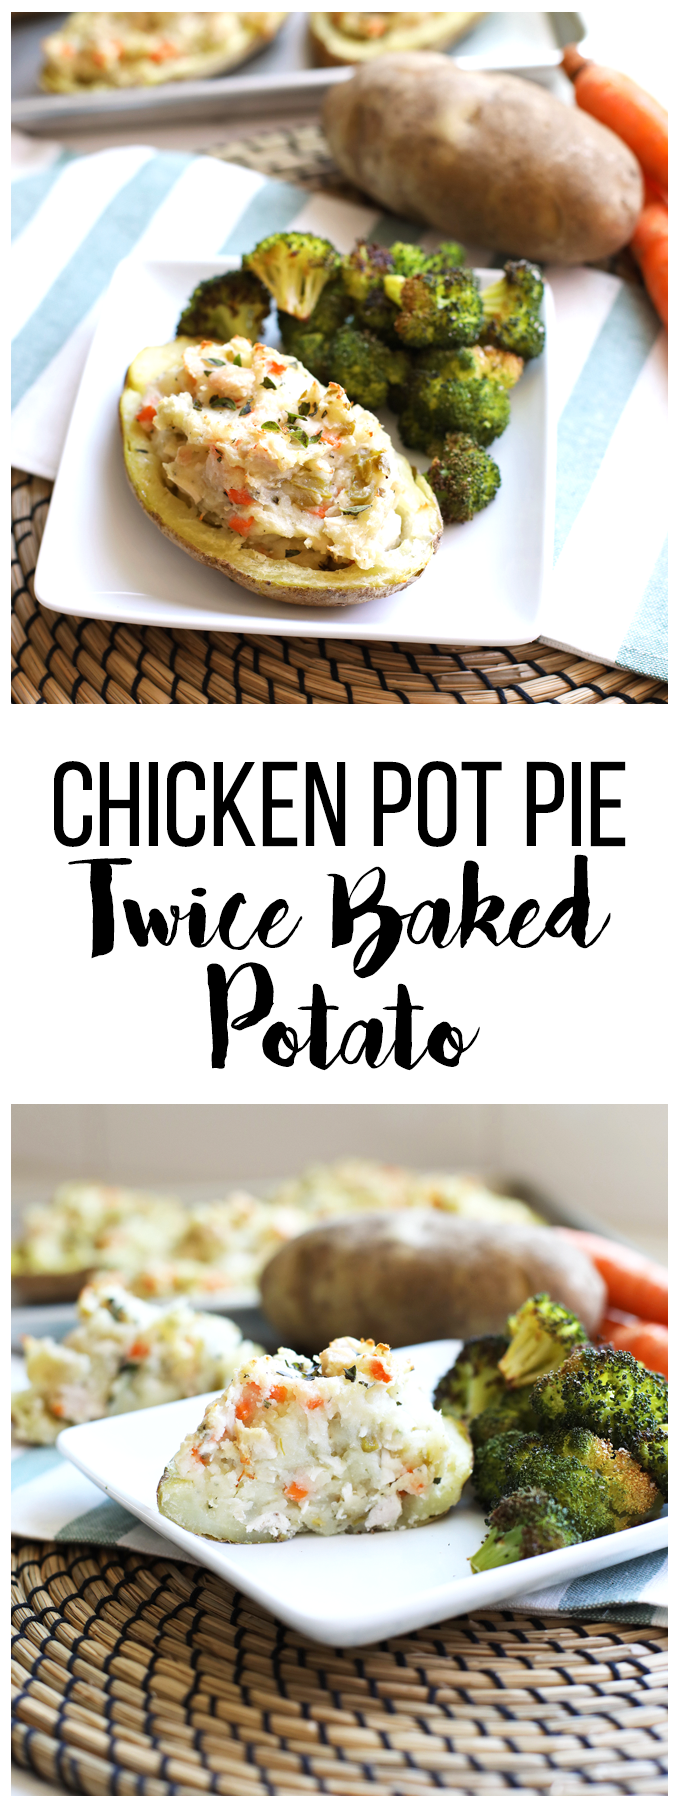 This Chicken Pot Pie Twice Baked Potatoes recipe is healthy comfort food at its finest! Whole30 compliant and perfect for fall!